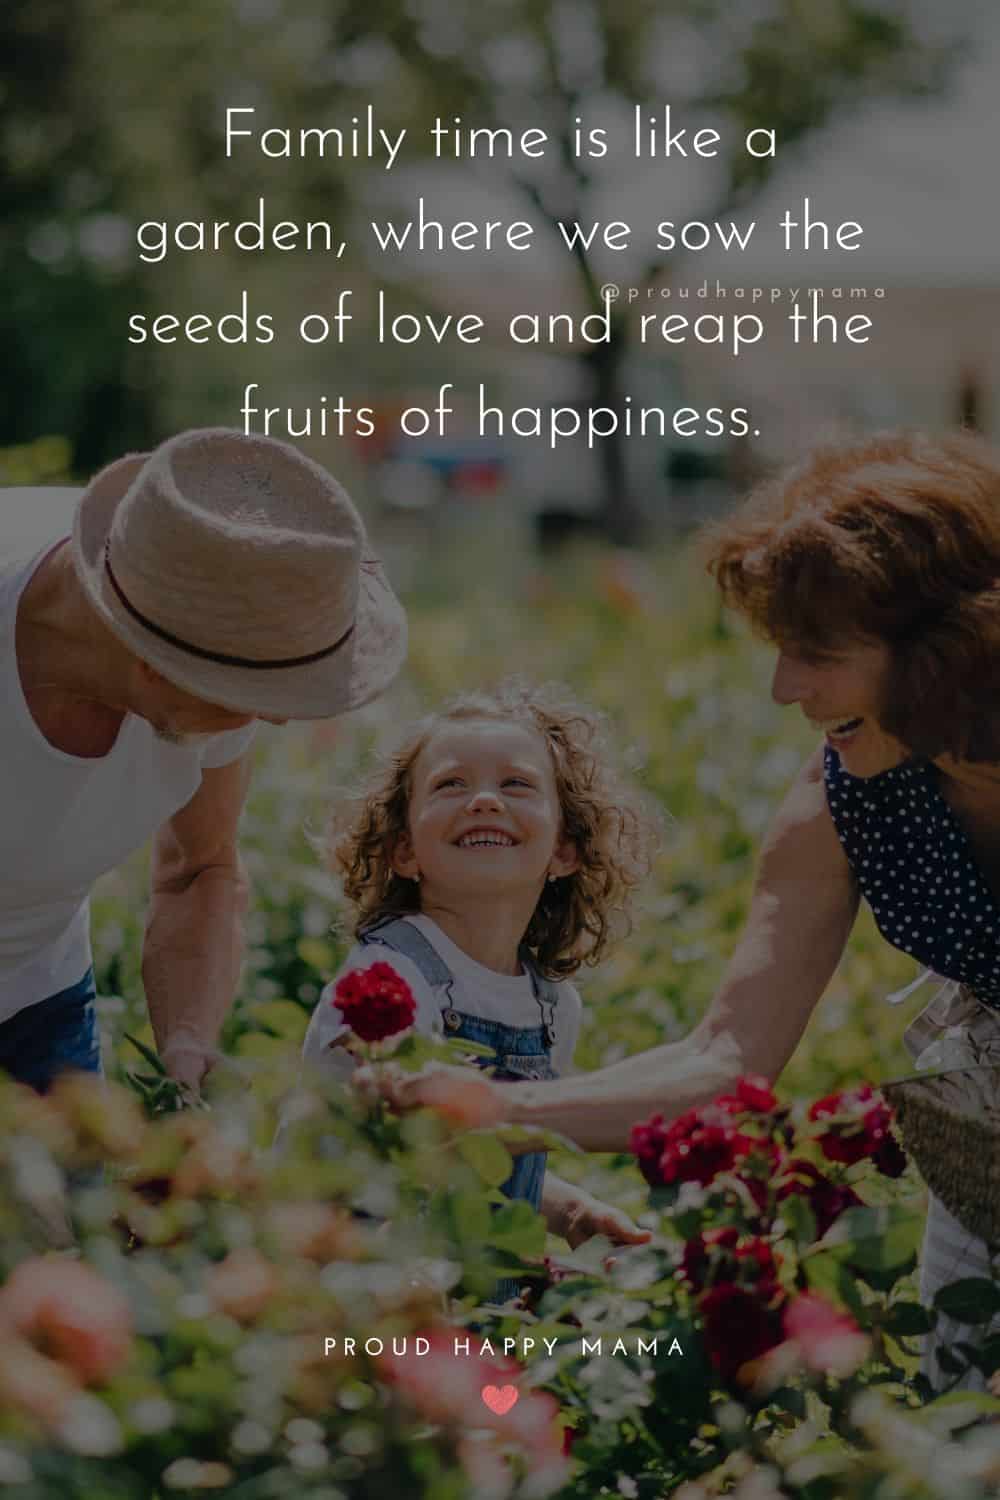 time with family quotes - Family time is like a garden, where we sow the seeds of love and reap the fruits of happiness.